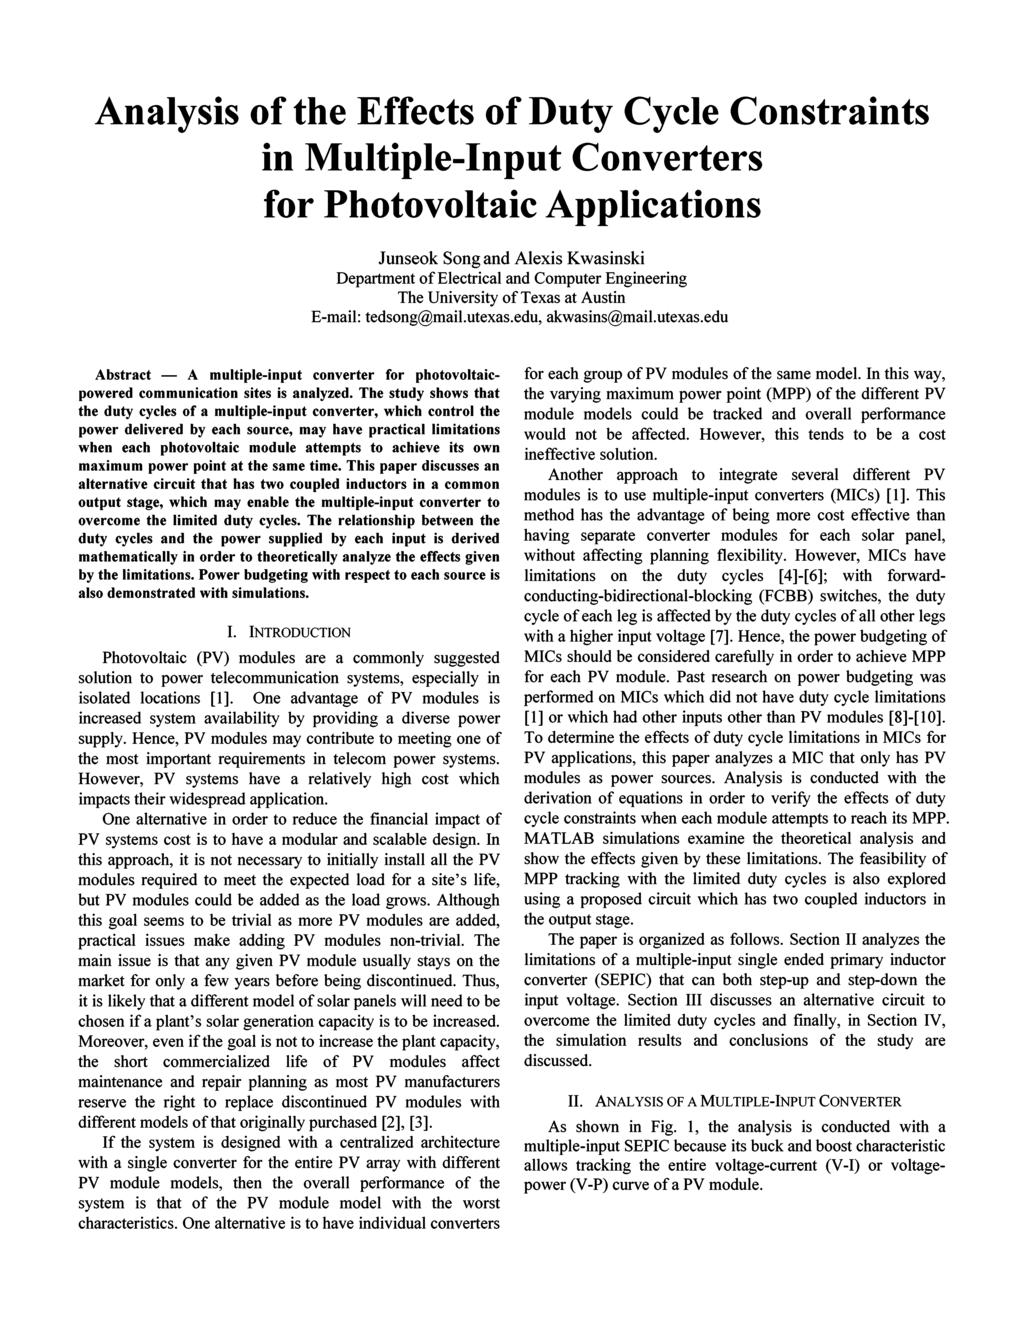 Analysis ofhe Effecs ofduy Cycle Consrains in Muliple-Inpu Converers for Phoovolaic Applicaions Junseok Song and Alexis Kwasinski Deparmen ofelecrical and Compuer Engineering The Universiy oftexas a